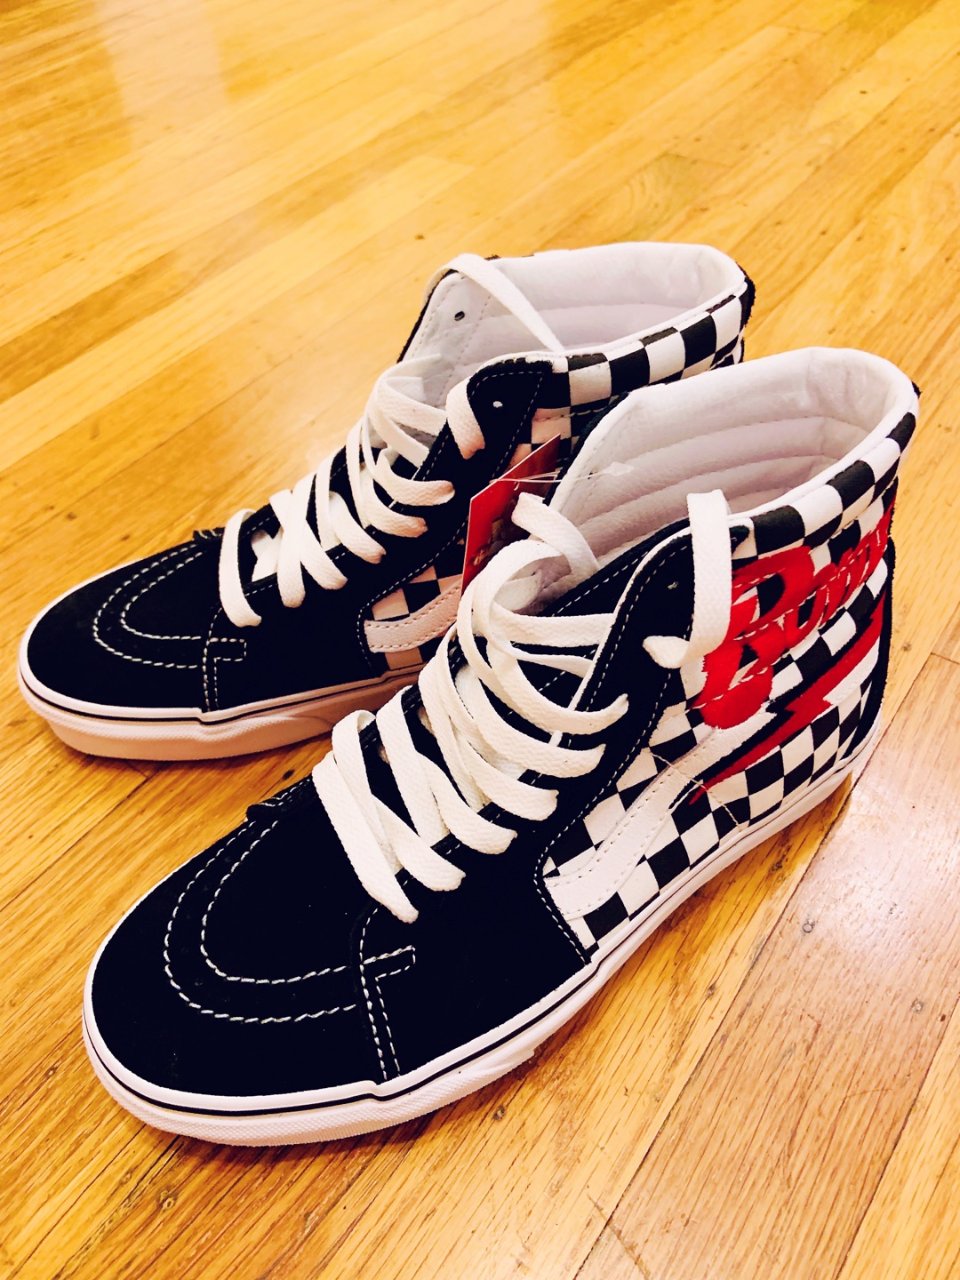 Vans David Bowie 2019 Limited Edition